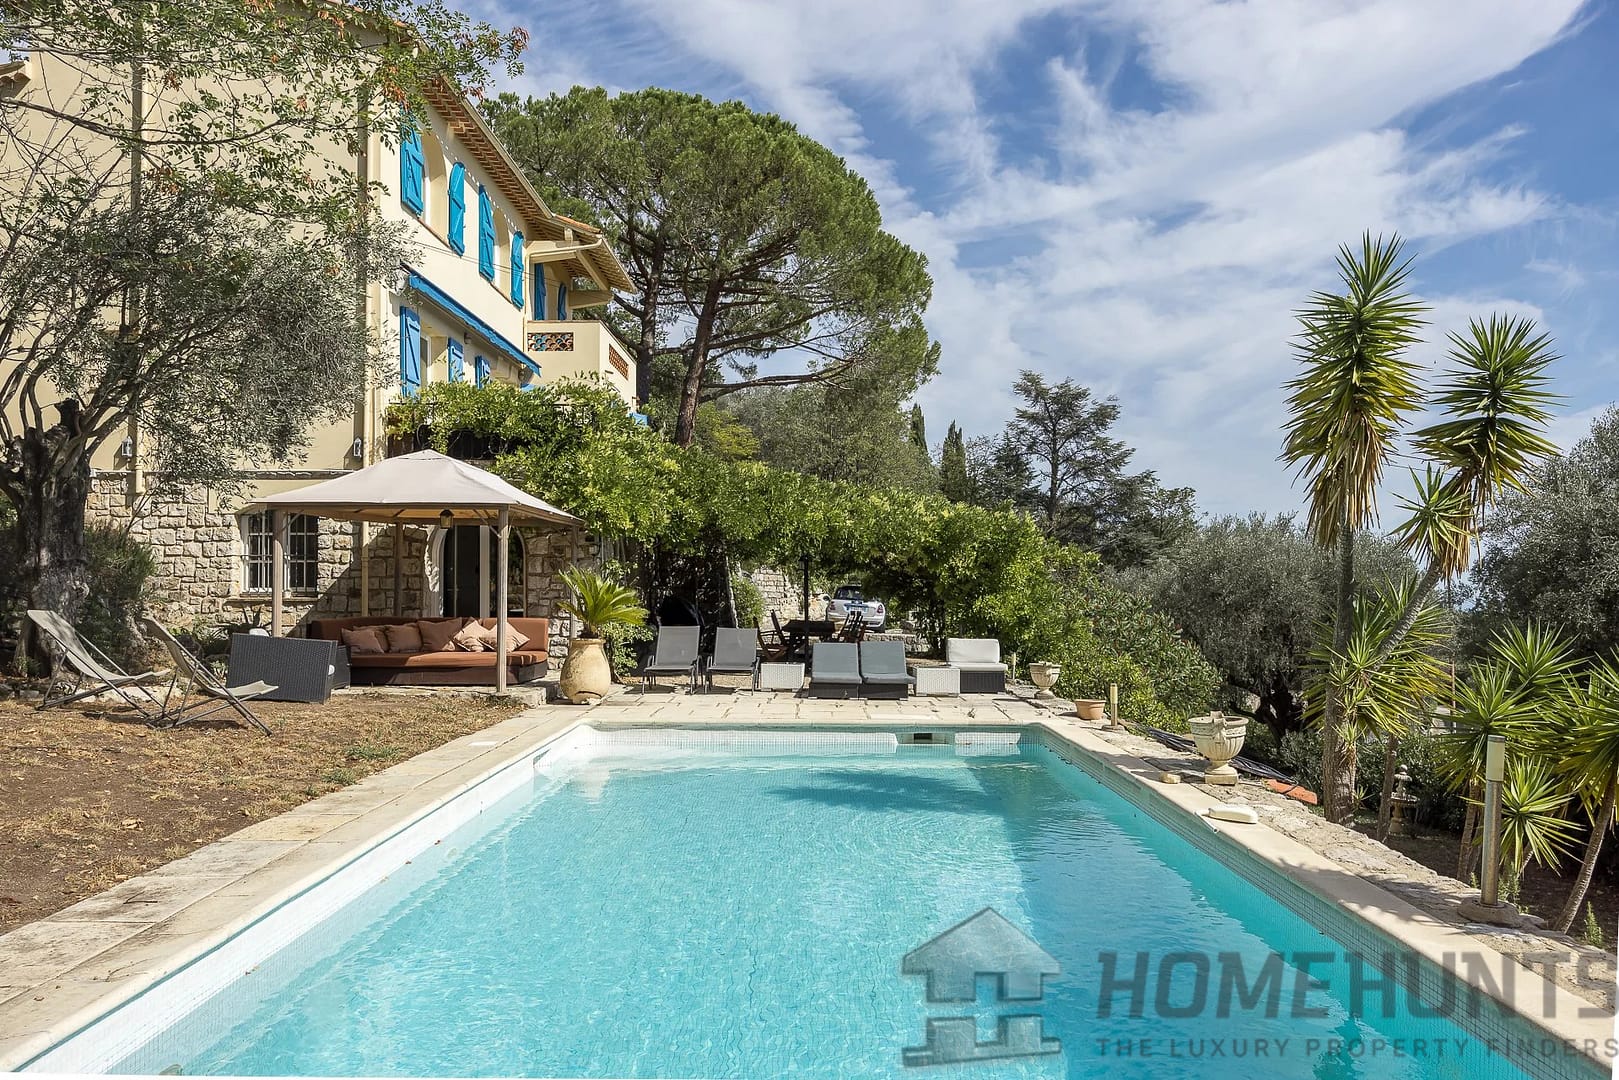 5 Bedroom Villa/House in Chateauneuf Grasse 8